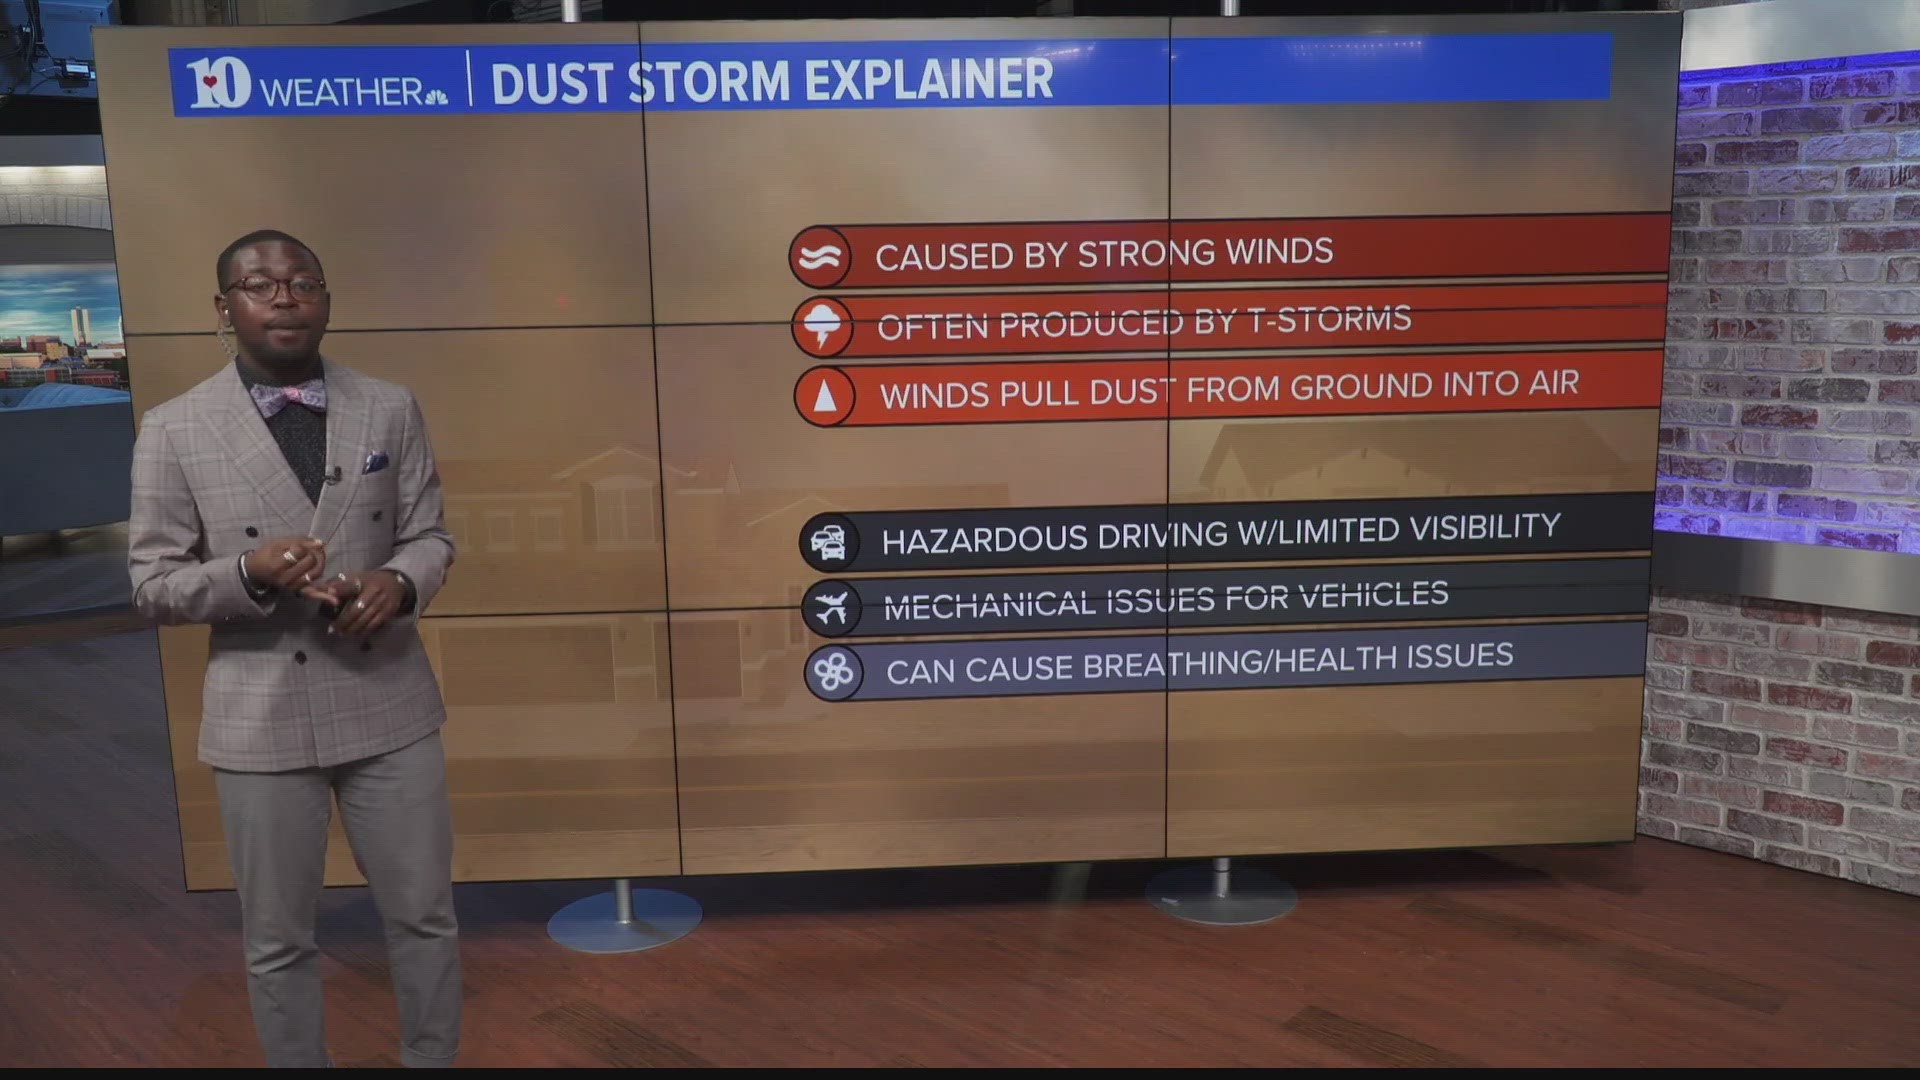 Based on recent events in Illinois, learn how dust storms form and how to stay safe in them.